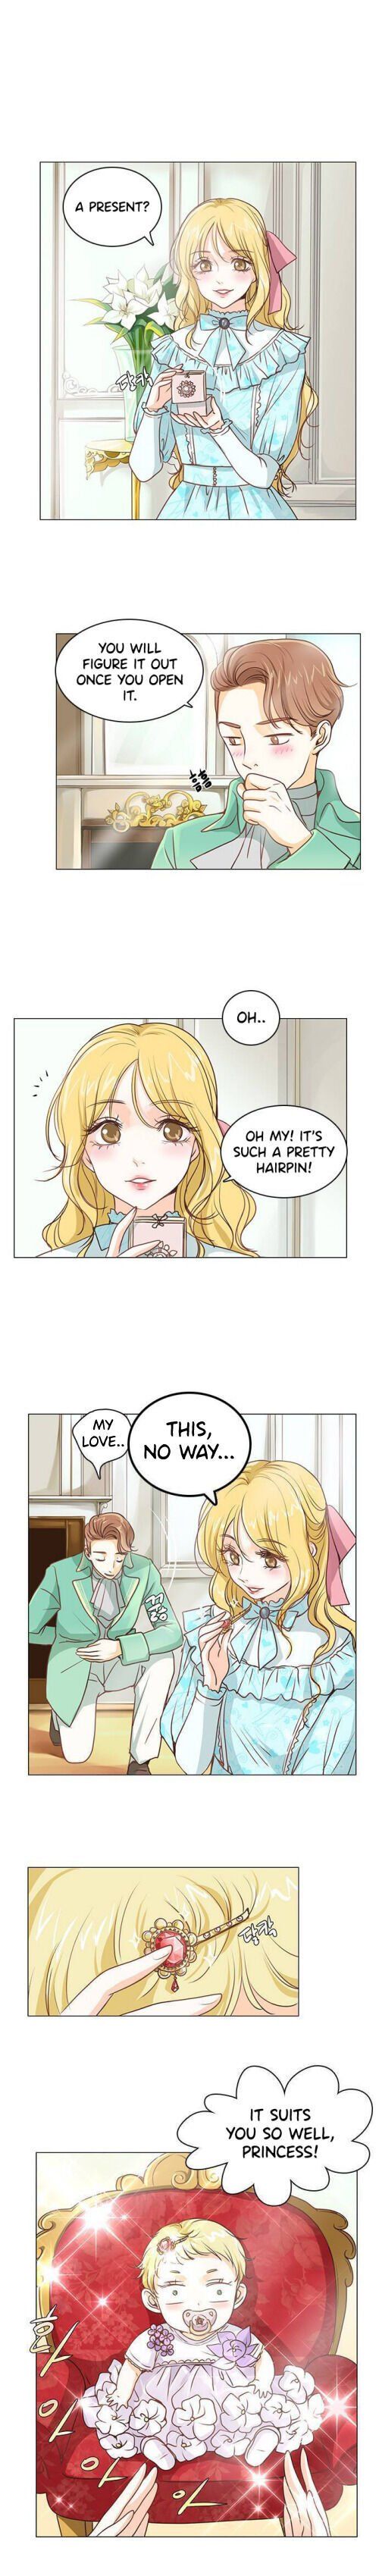 Matchmaking Baby Princess Chapter 1 page 2